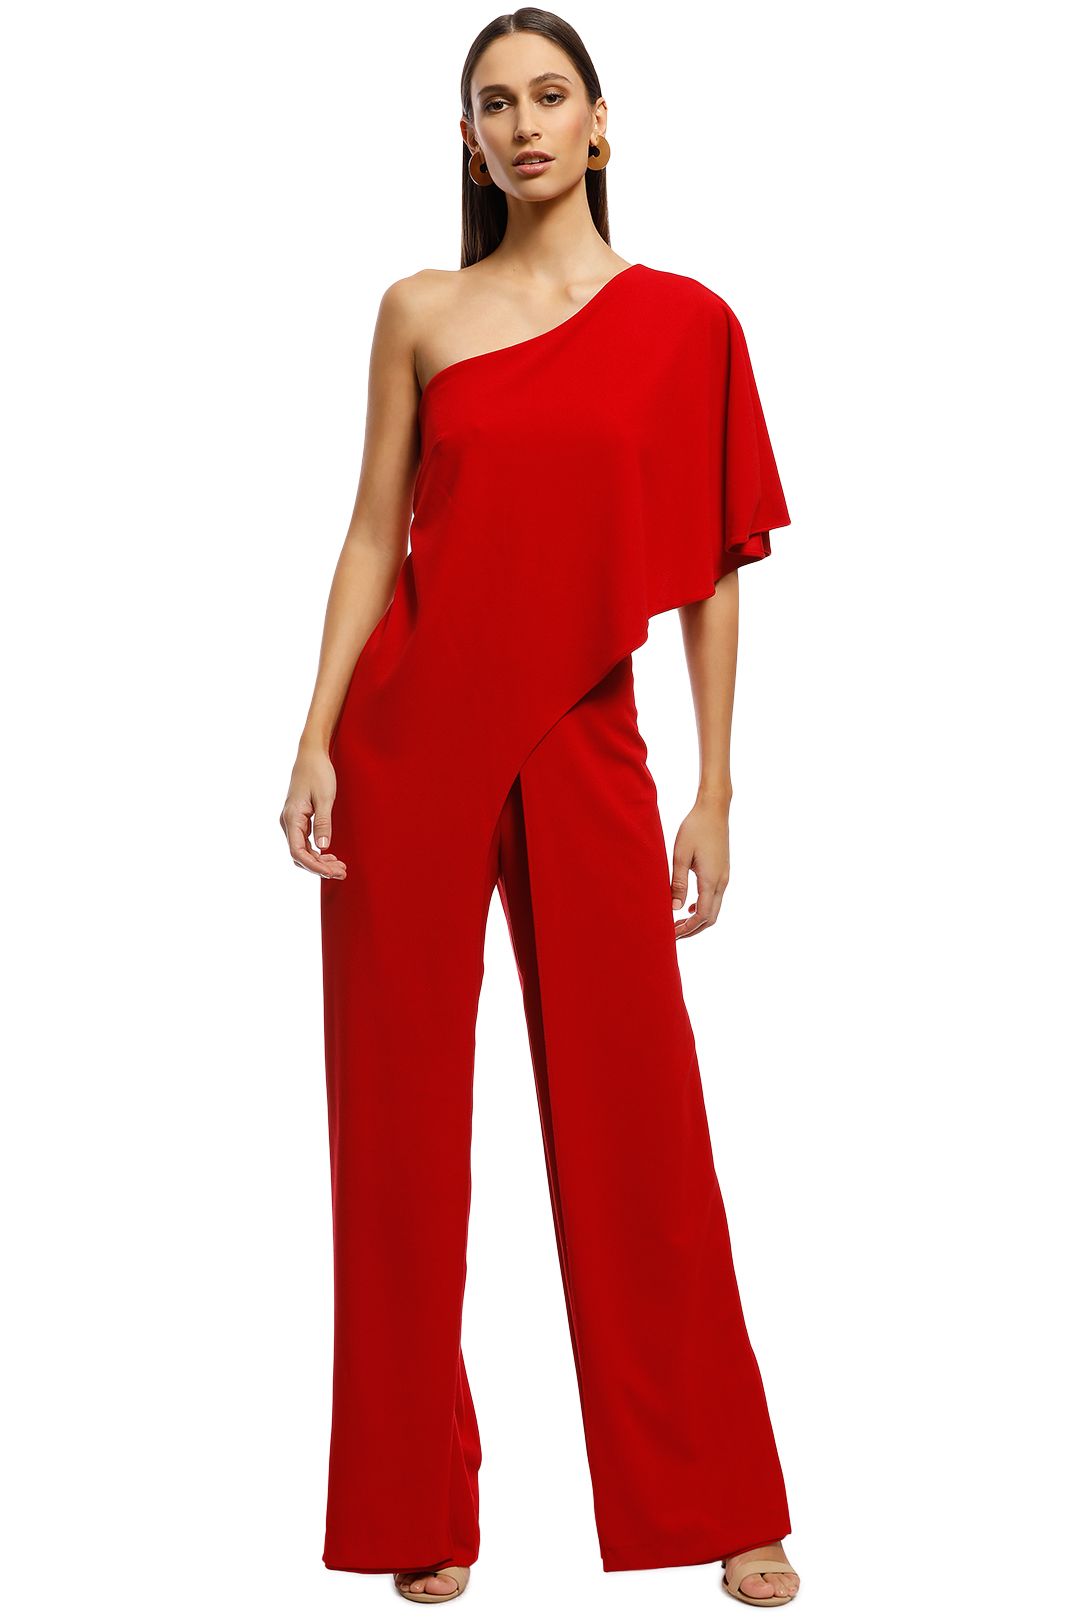 Harper Jumpsuit - Red by Montique for Hire